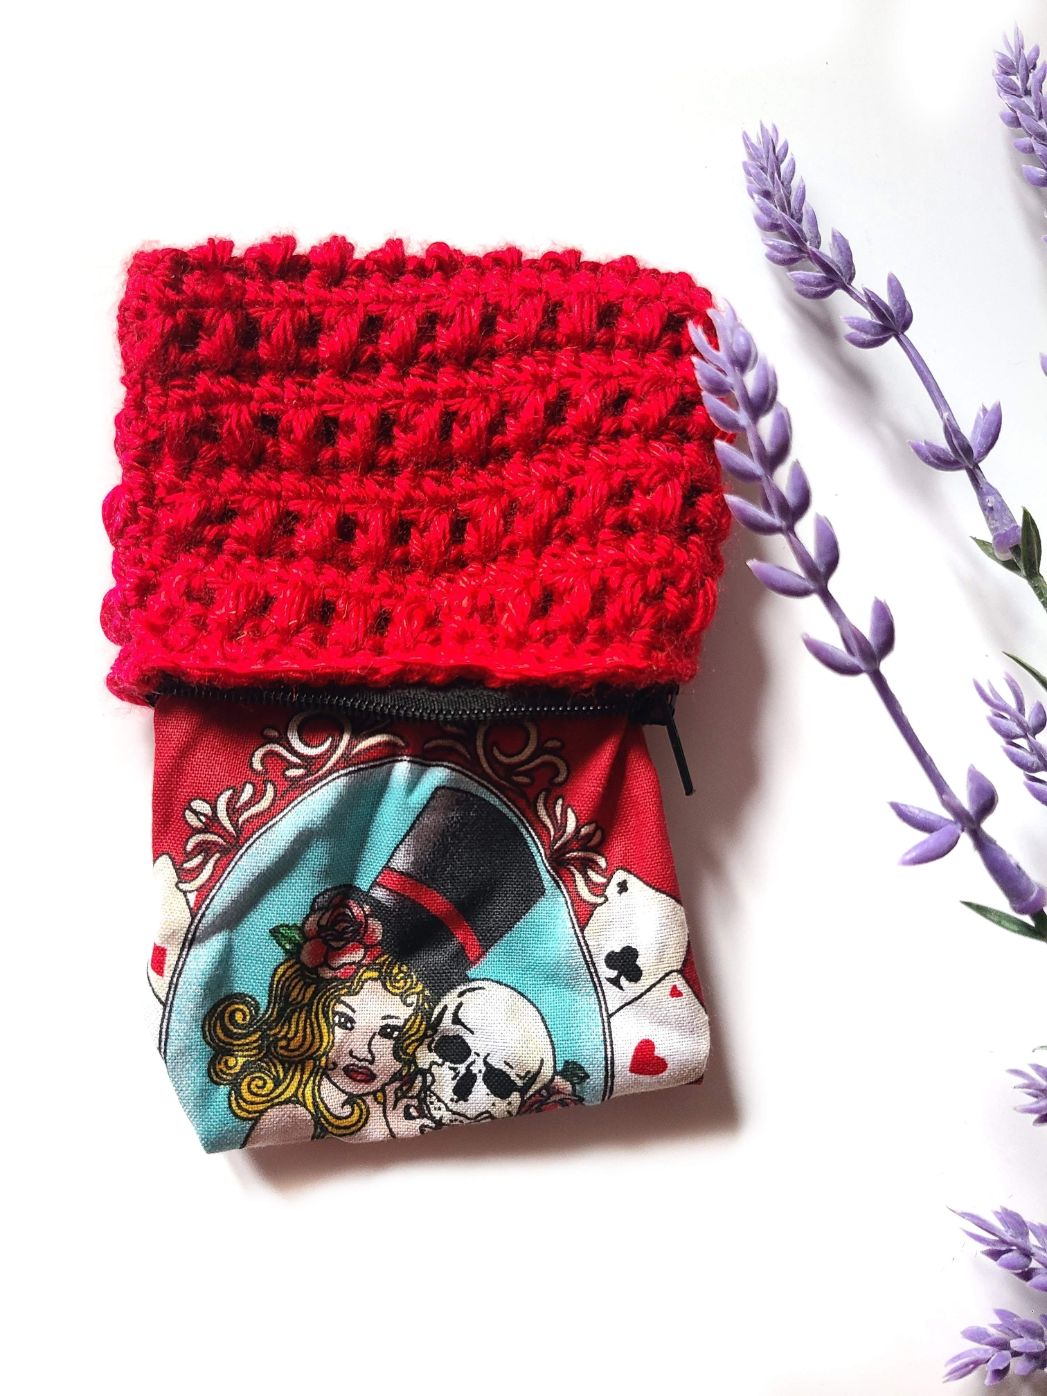 An example of the fabric inside the red coin purse